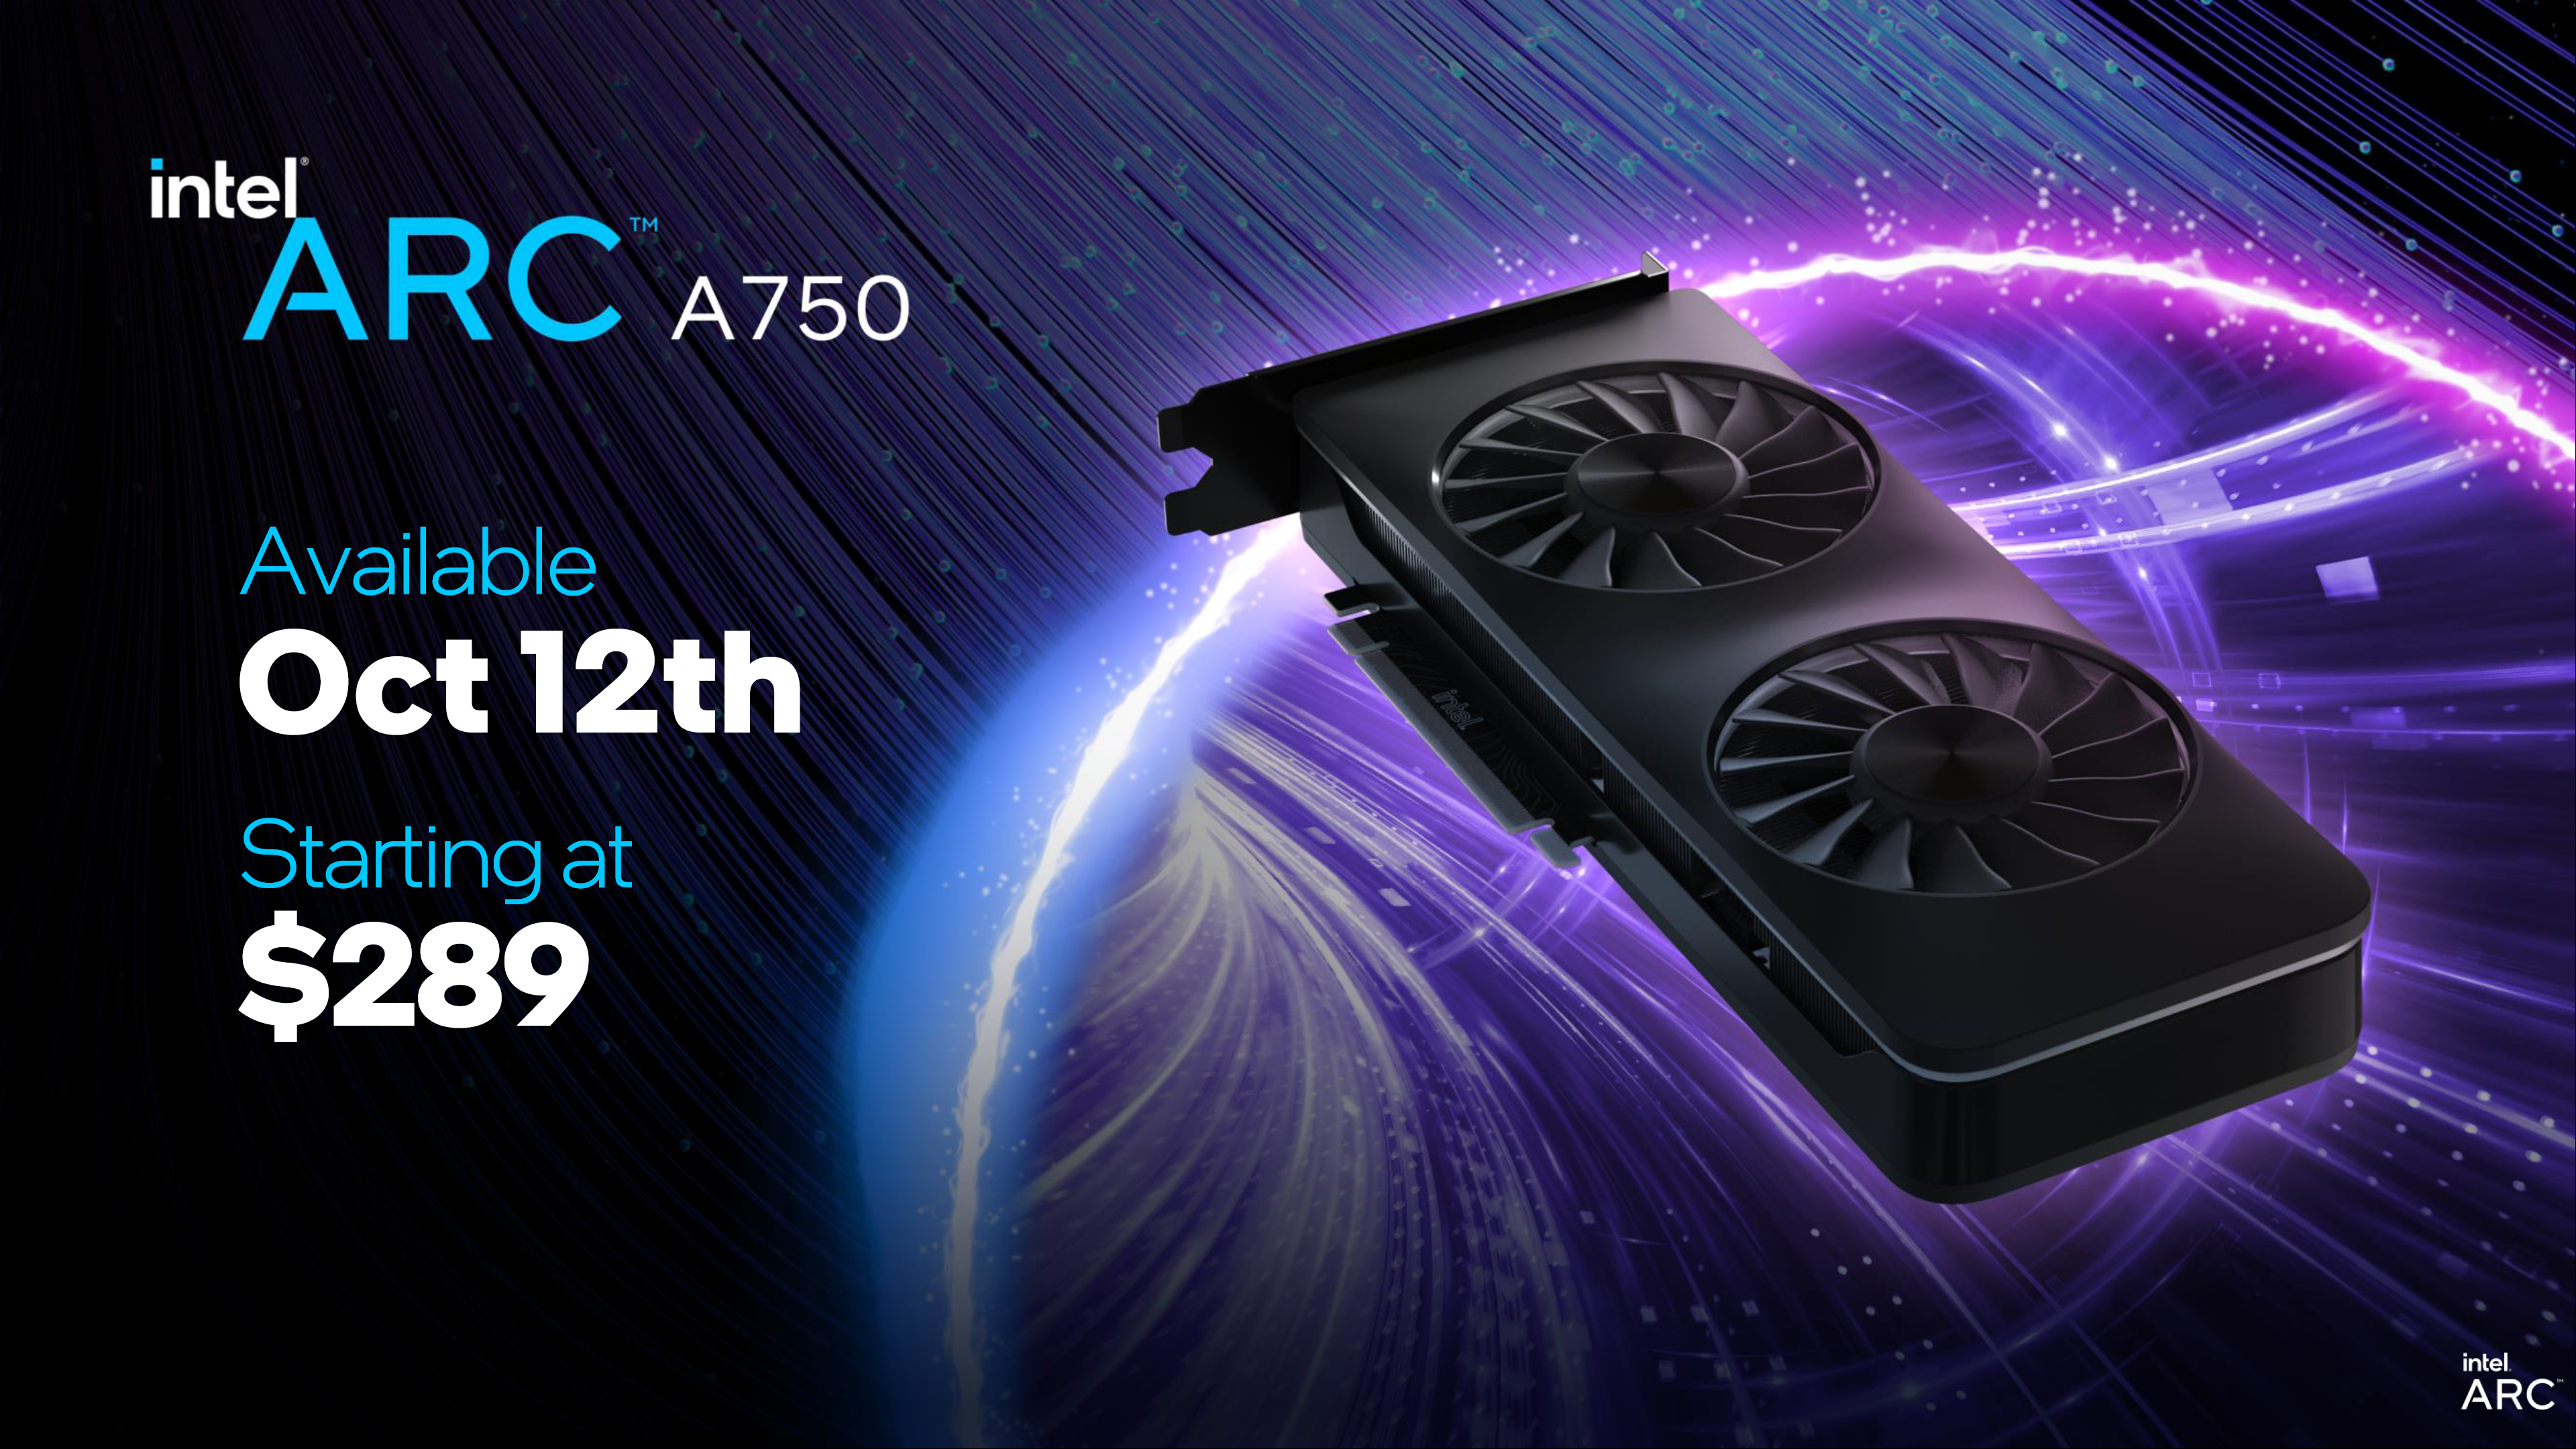 Intel-Arc-A770-Arc-A750-12th-October-Launch-Confirmd-329-289-US-Price-_7.png